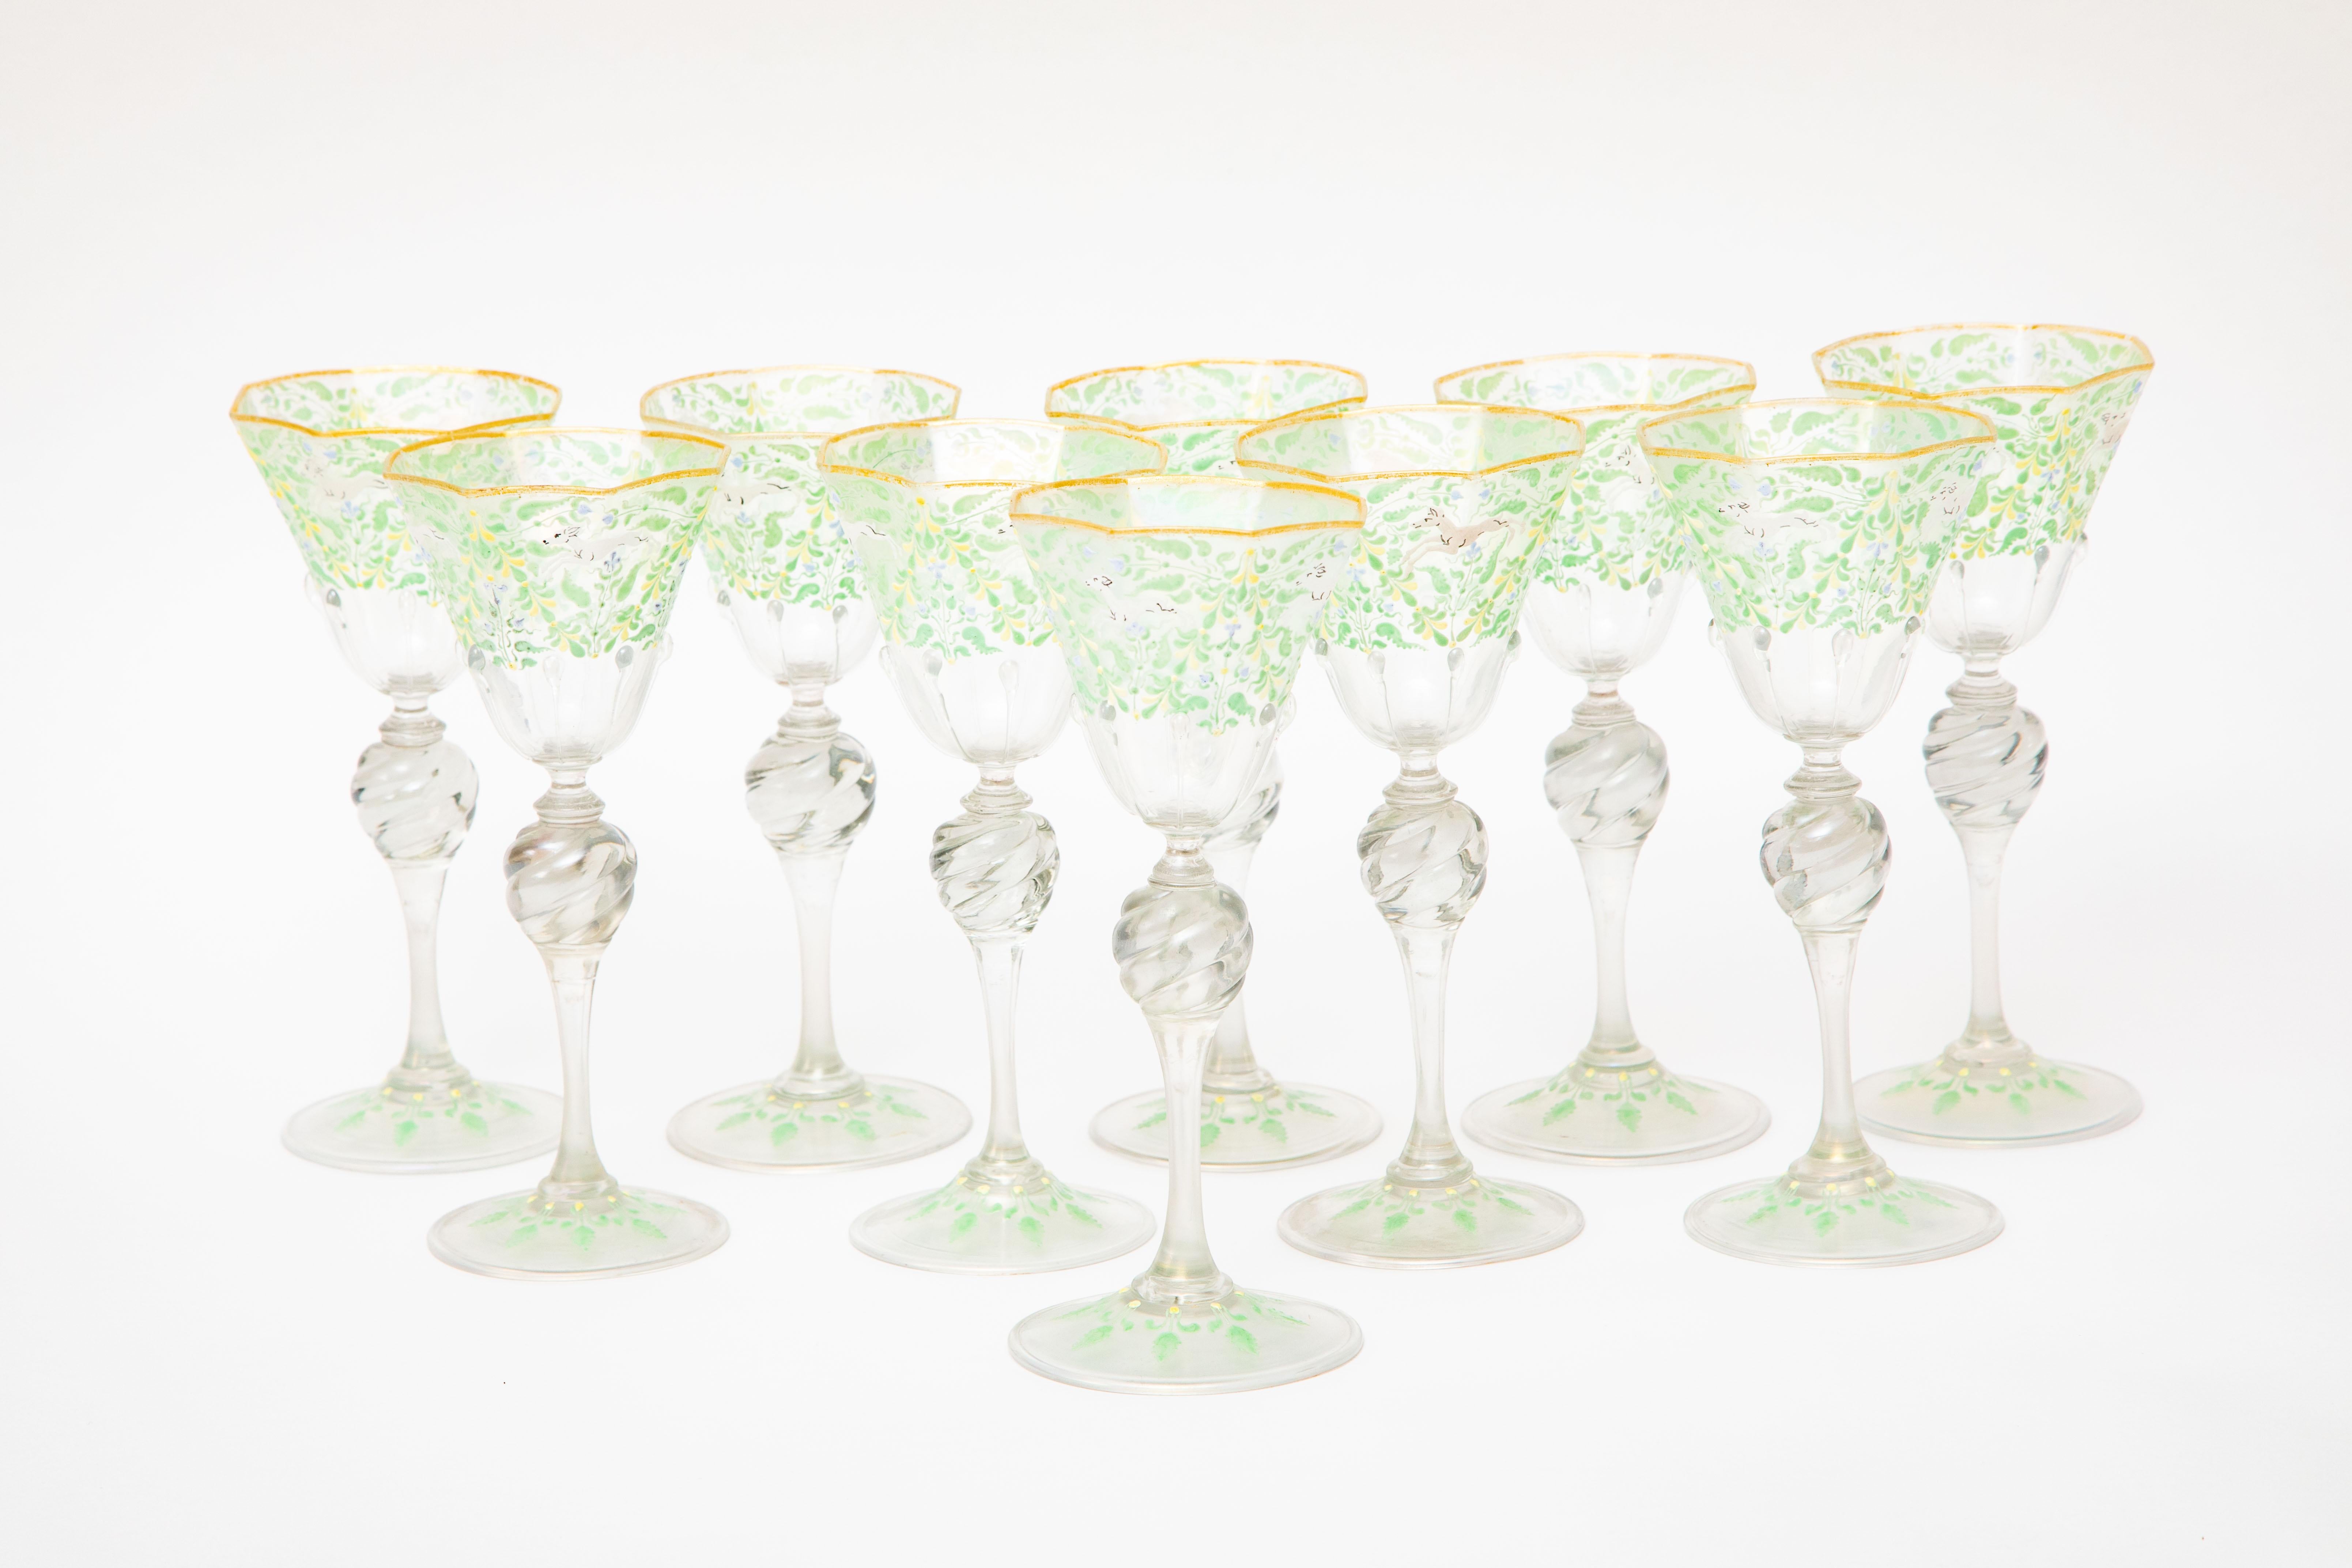 Late 19th Century 10 Antique Venetian Goblets, Hand Enameled circa 1890 with Knob Stems For Sale